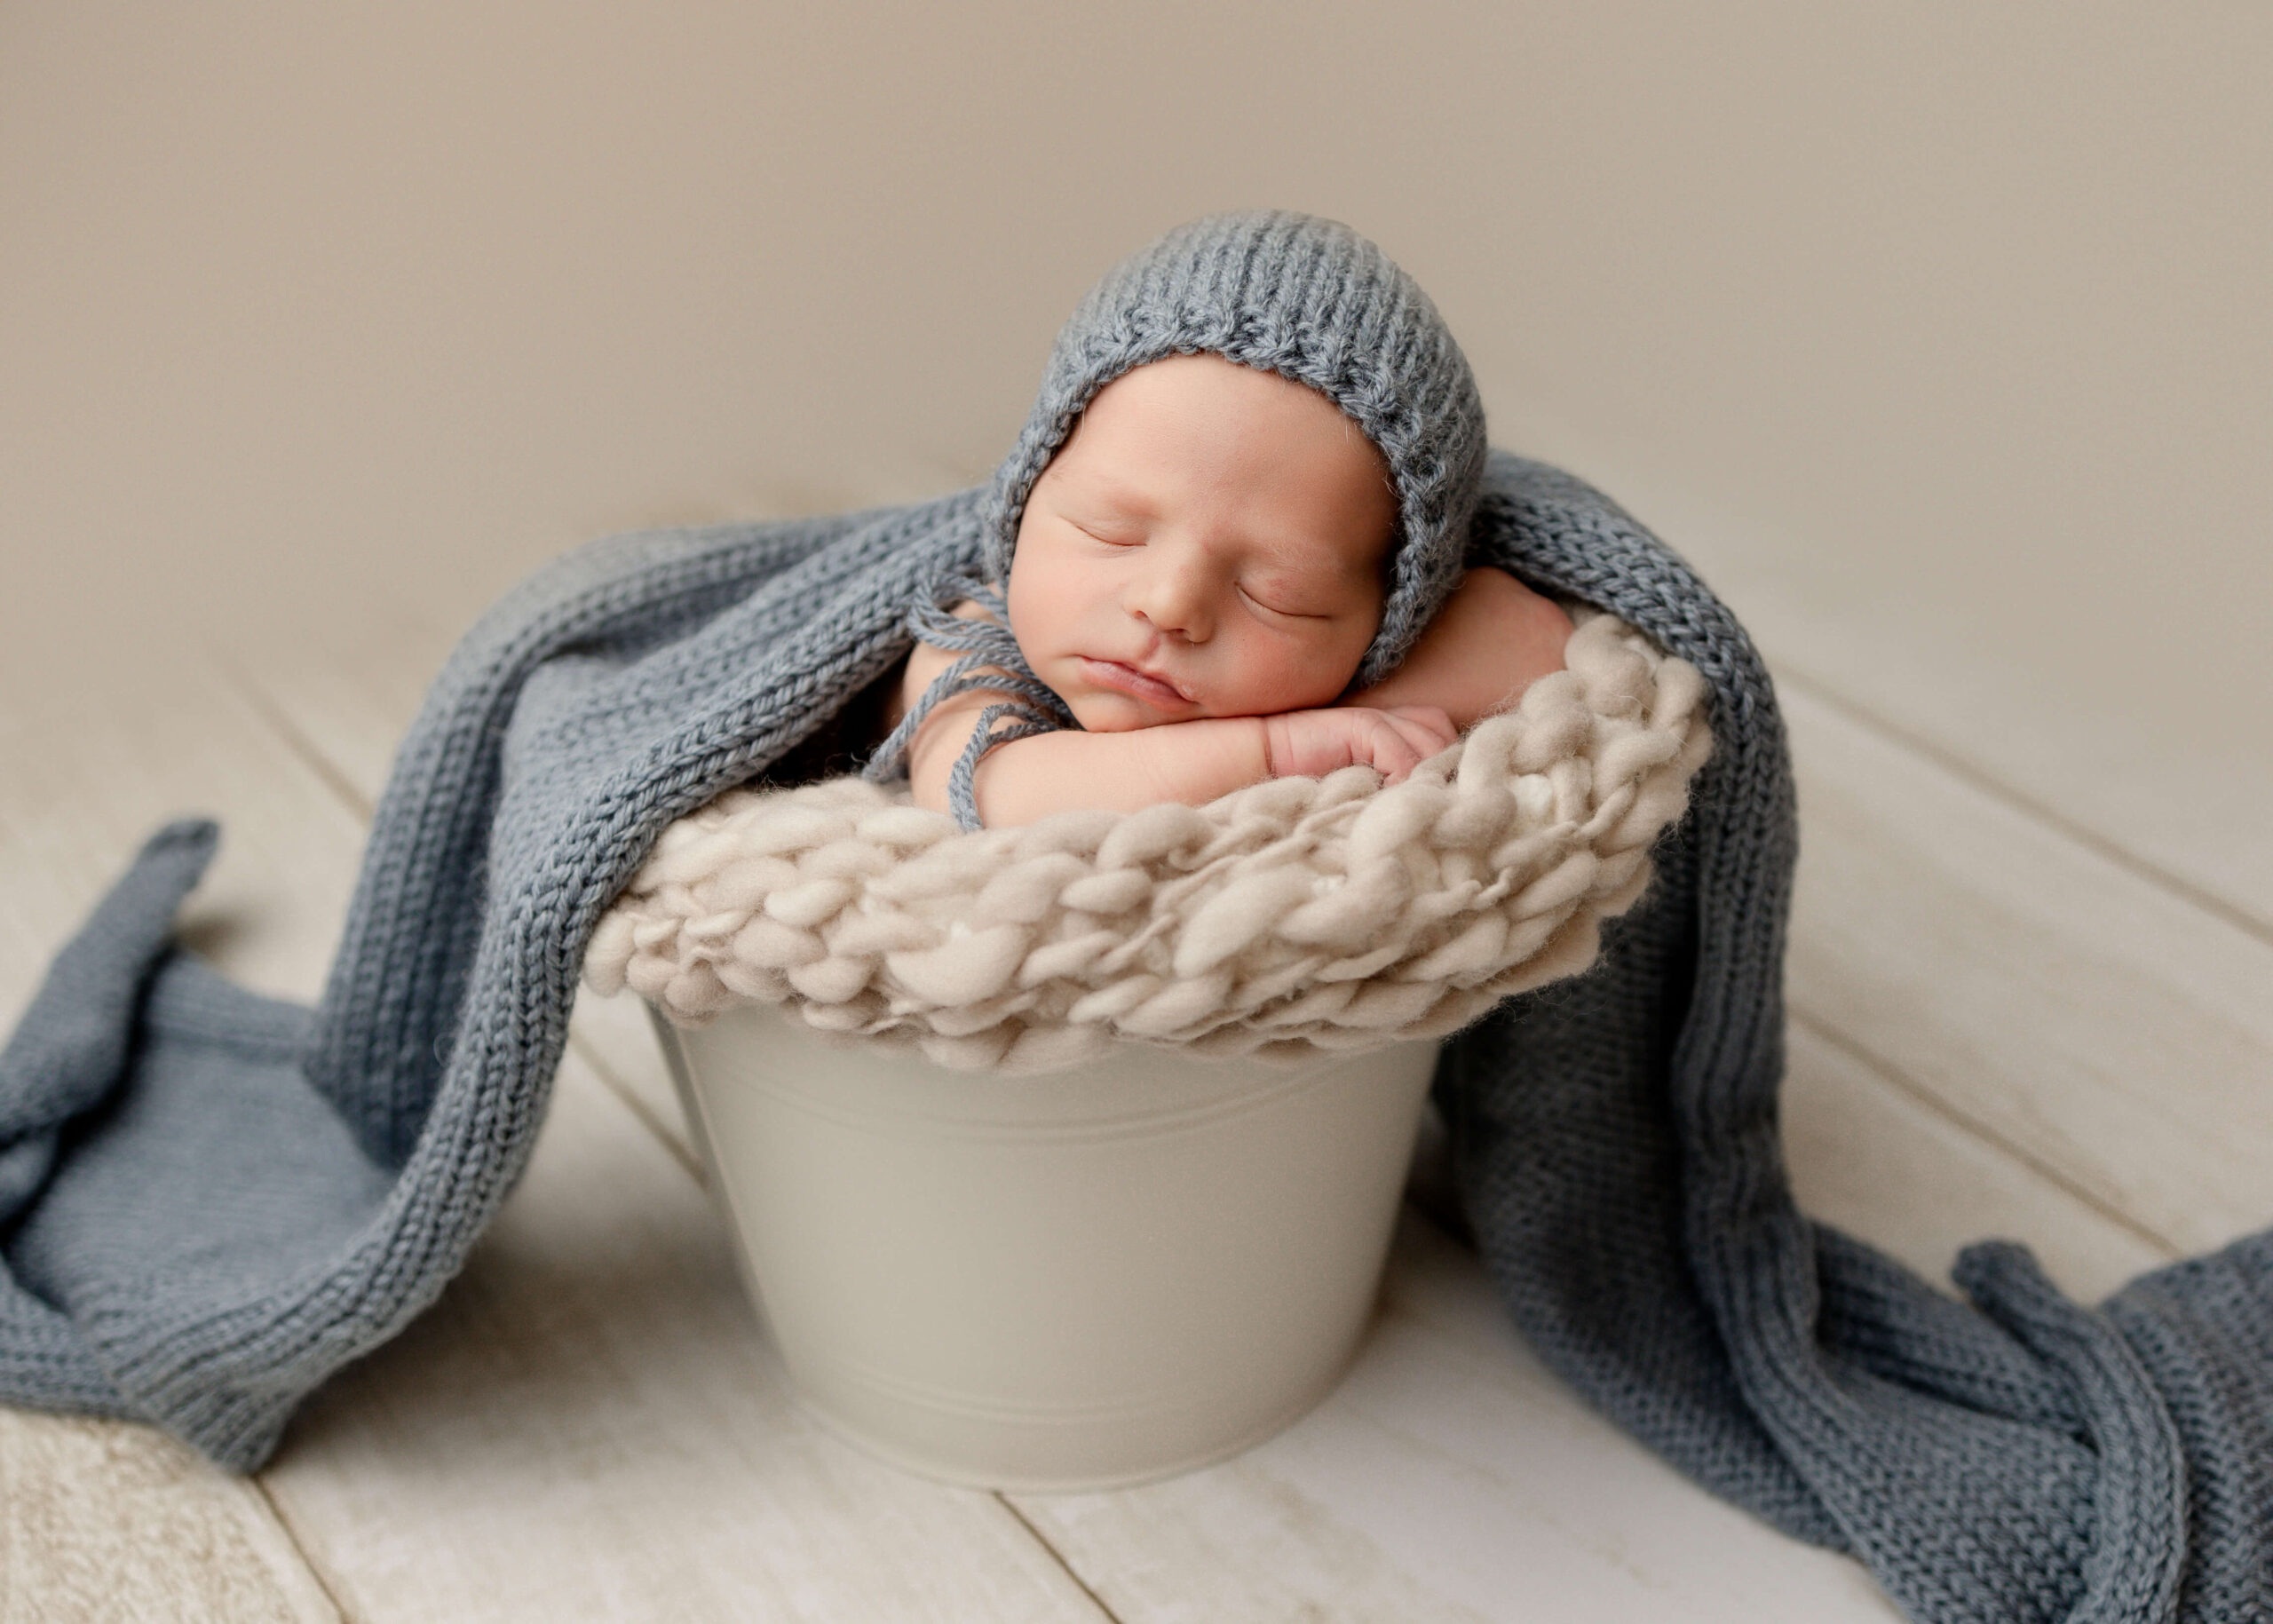 Newborn baby posed with blue knit bonnet in bucket in studio session by Ashley Nicole.